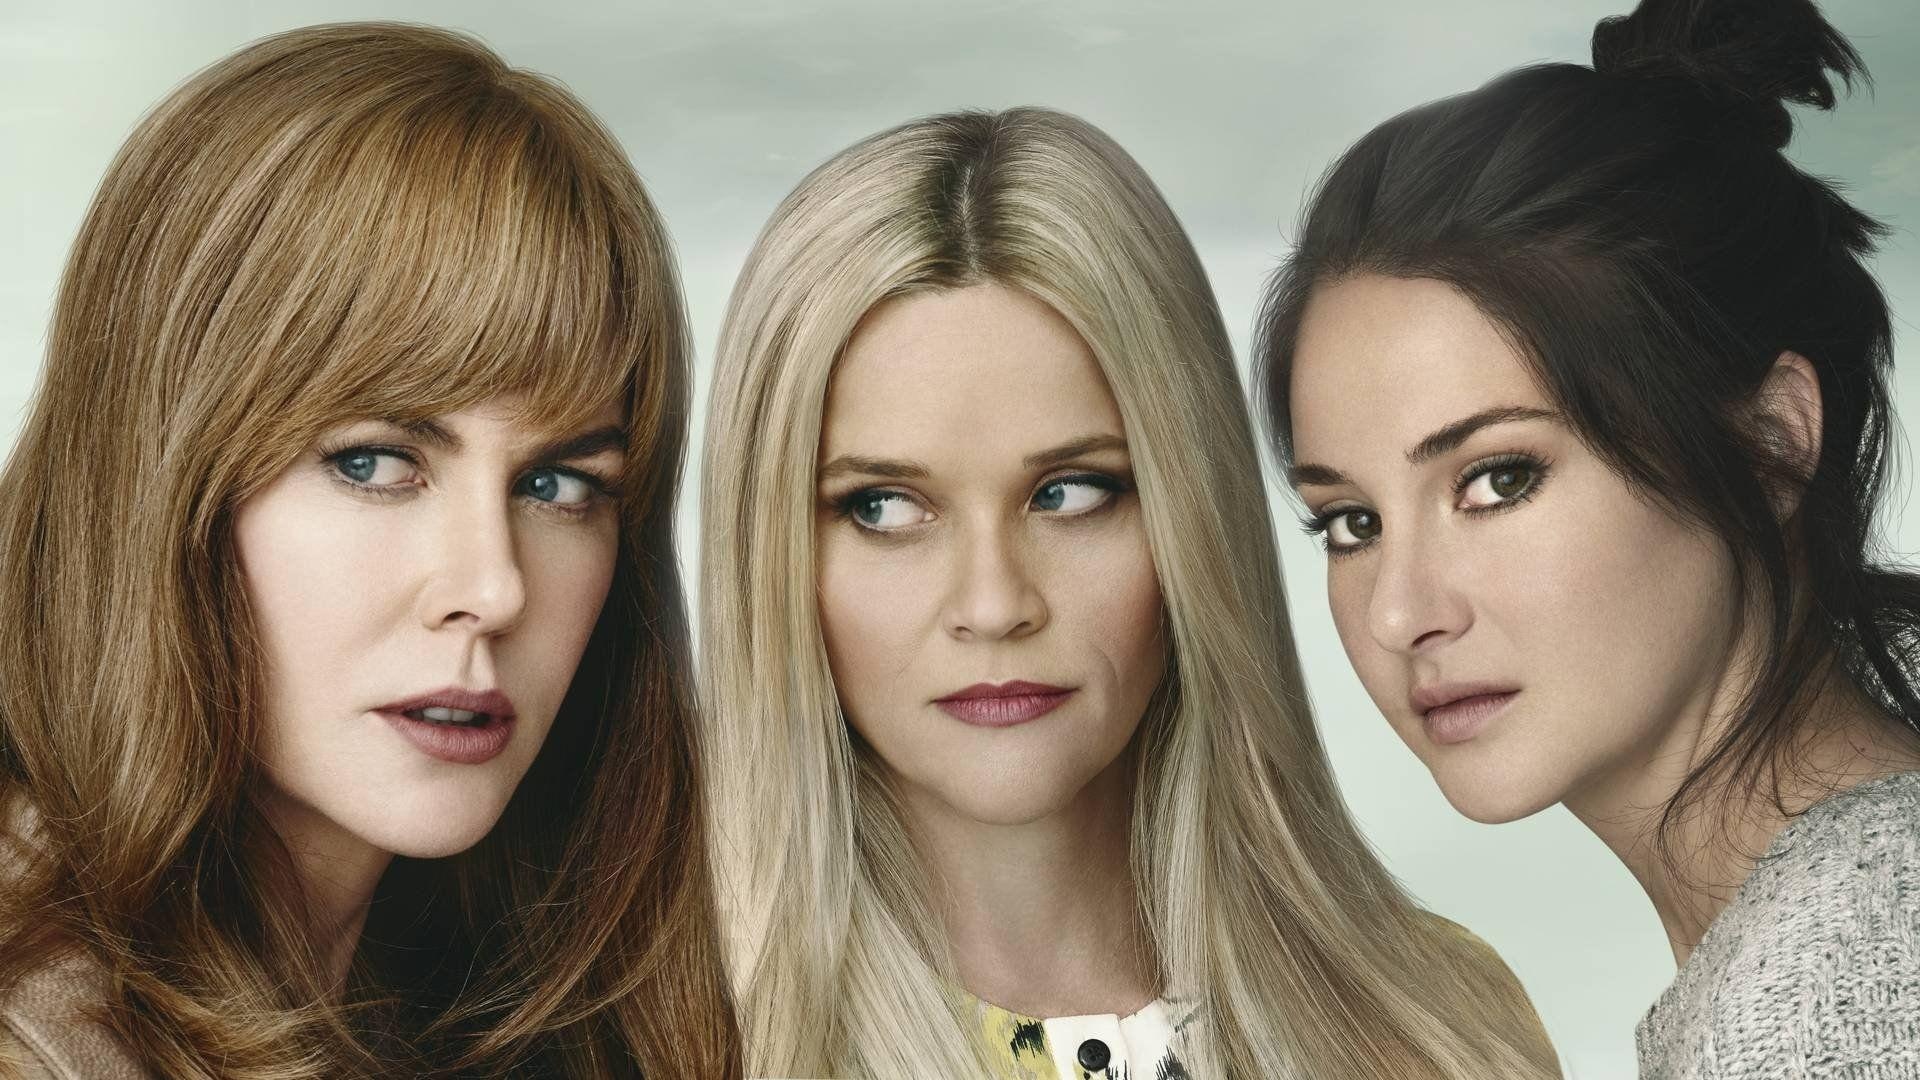 Reese Witherspoon, Big Little Lies, Top free wallpapers, 1920x1080 Full HD Desktop